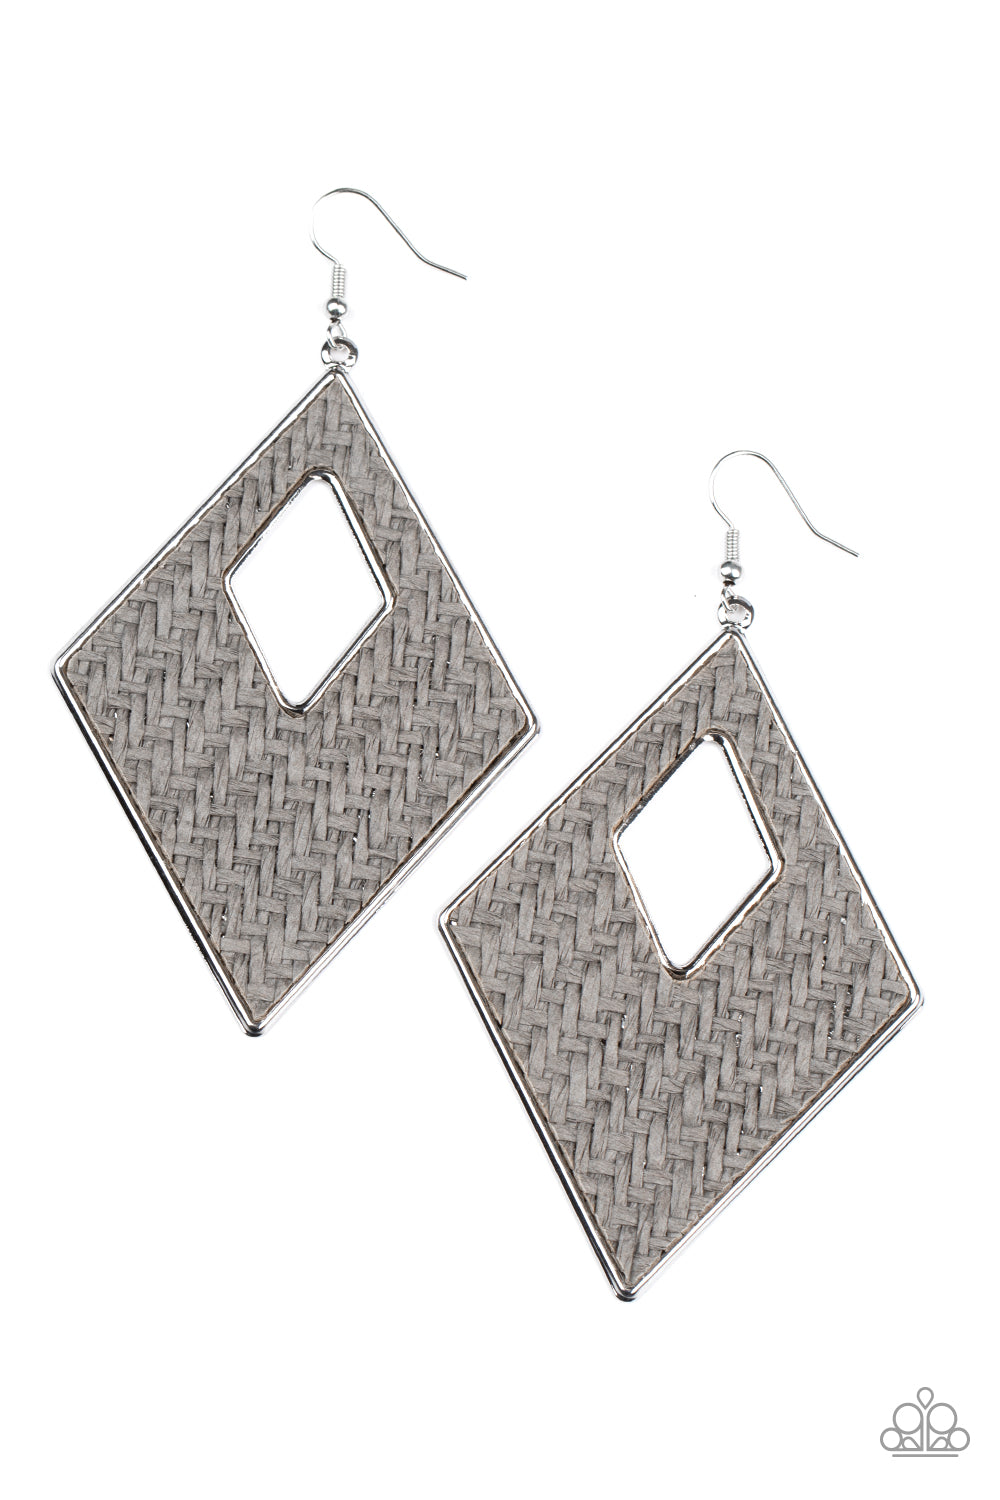 &lt;P&gt;Featuring a wicker-like pattern, gray thread weaves across the front of a silver diamond-shape frame for a trendsetting look. Earring attaches to a standard fishhook fitting.&lt;/P&gt;  

&lt;P&gt; &lt;I&gt;  Sold as one pair of earrings. &lt;/I&gt;  &lt;/P&gt;


&lt;img src=\&quot;https://d9b54x484lq62.cloudfront.net/paparazzi/shopping/images/517_tag150x115_1.png\&quot; alt=\&quot;New Kit\&quot; align=\&quot;middle\&quot; height=\&quot;50\&quot; width=\&quot;50\&quot;/&gt;